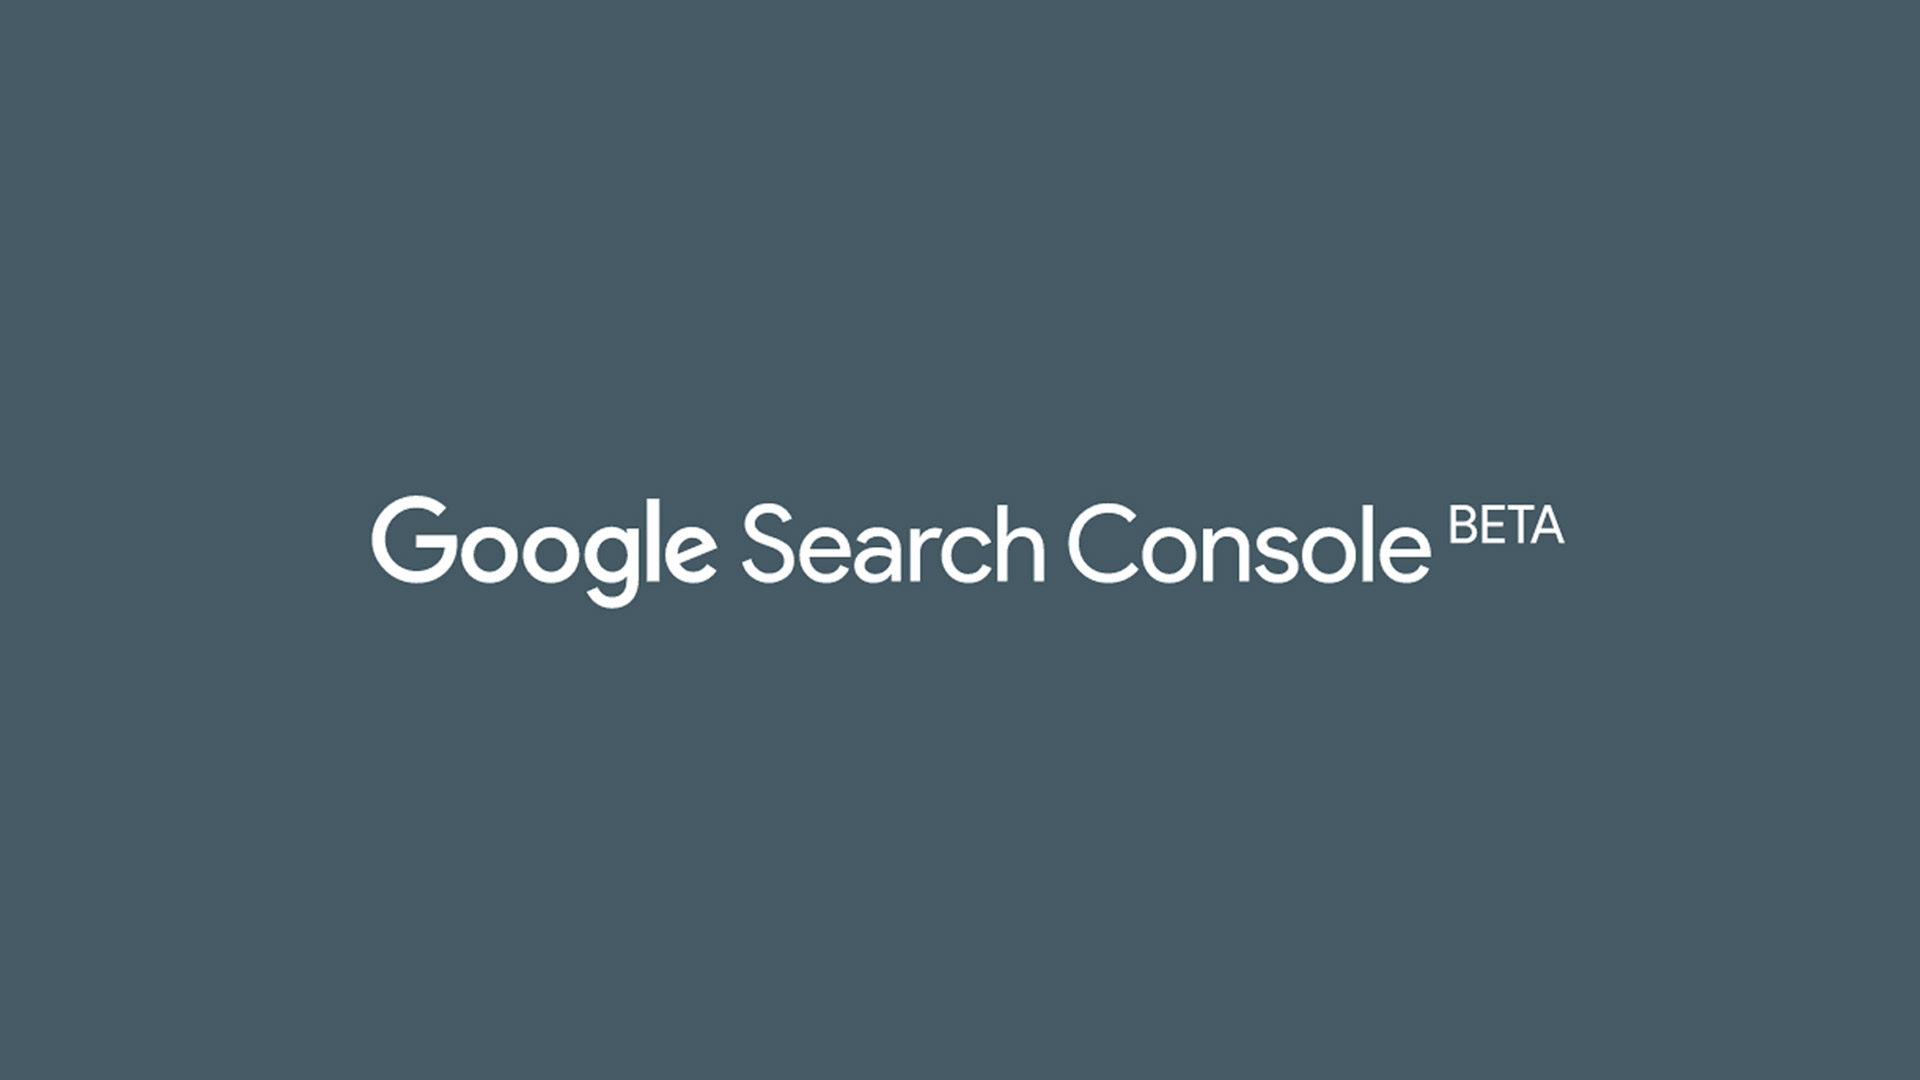 Google's New Search Console Beta - Great Start, but Missing Key Features